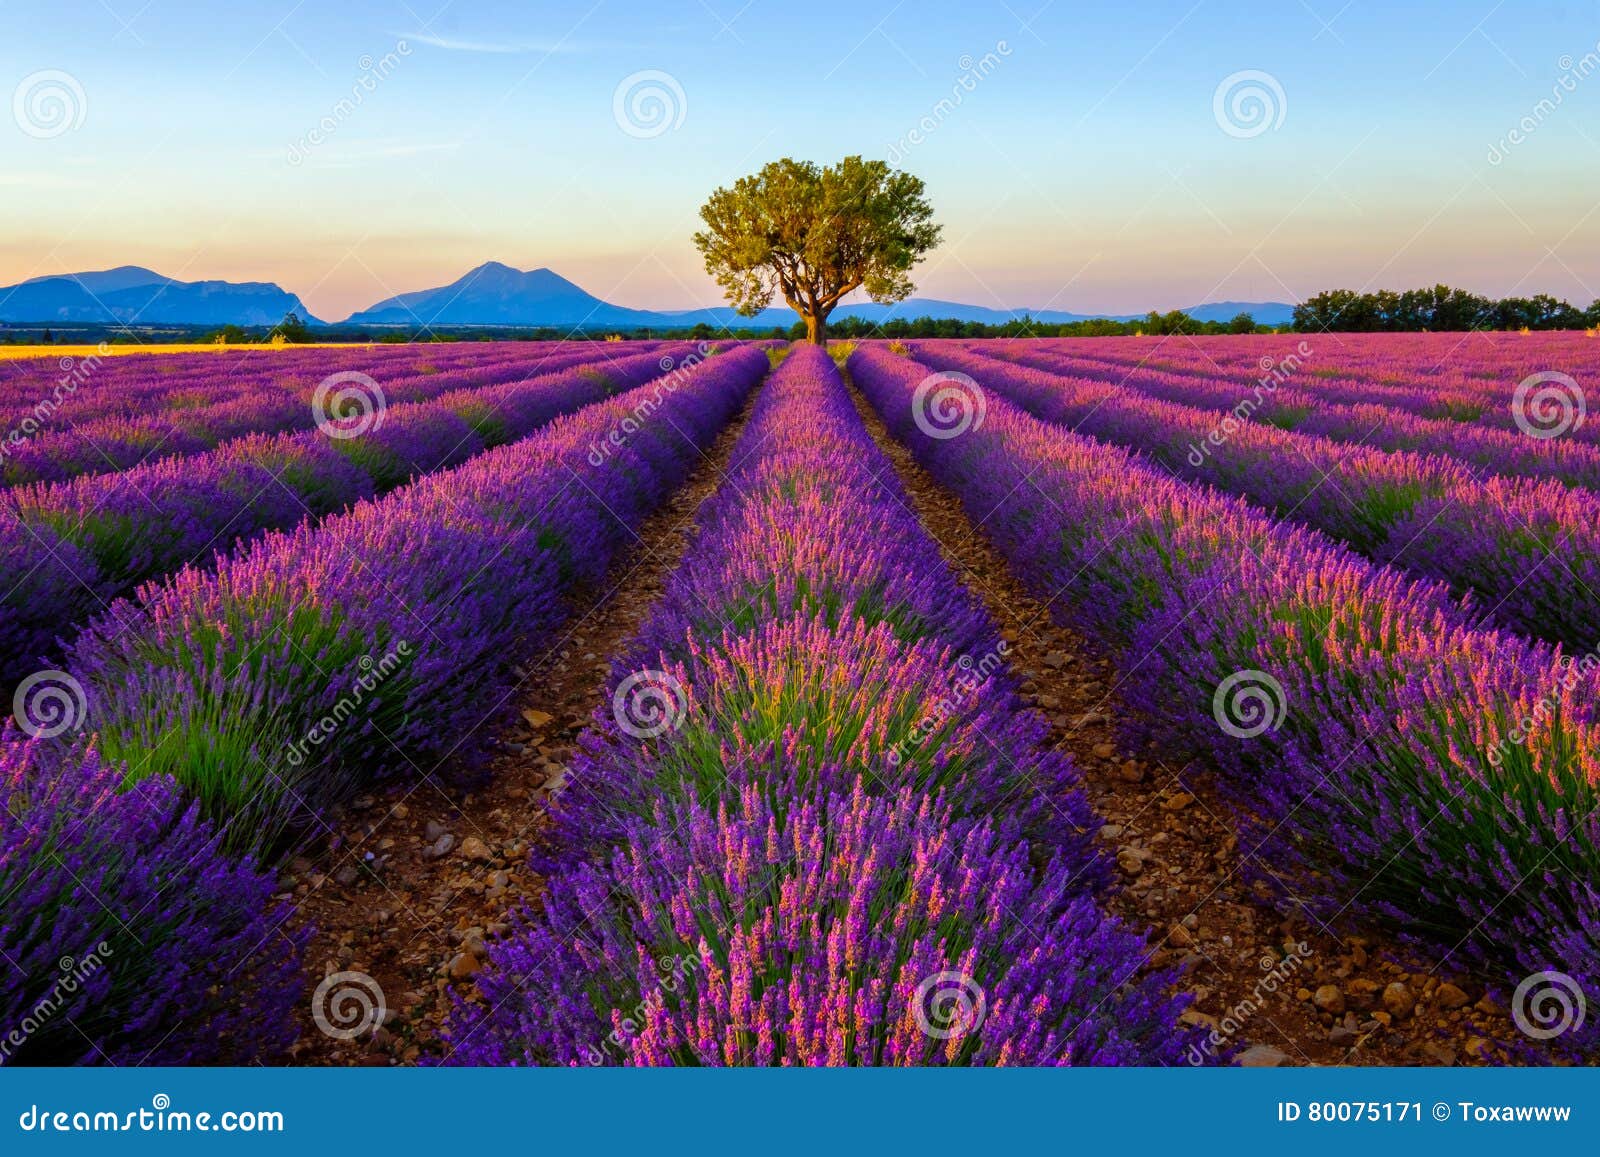 Tree in Lavender Field at Sunset Stock Image - Image of nature, tree ...